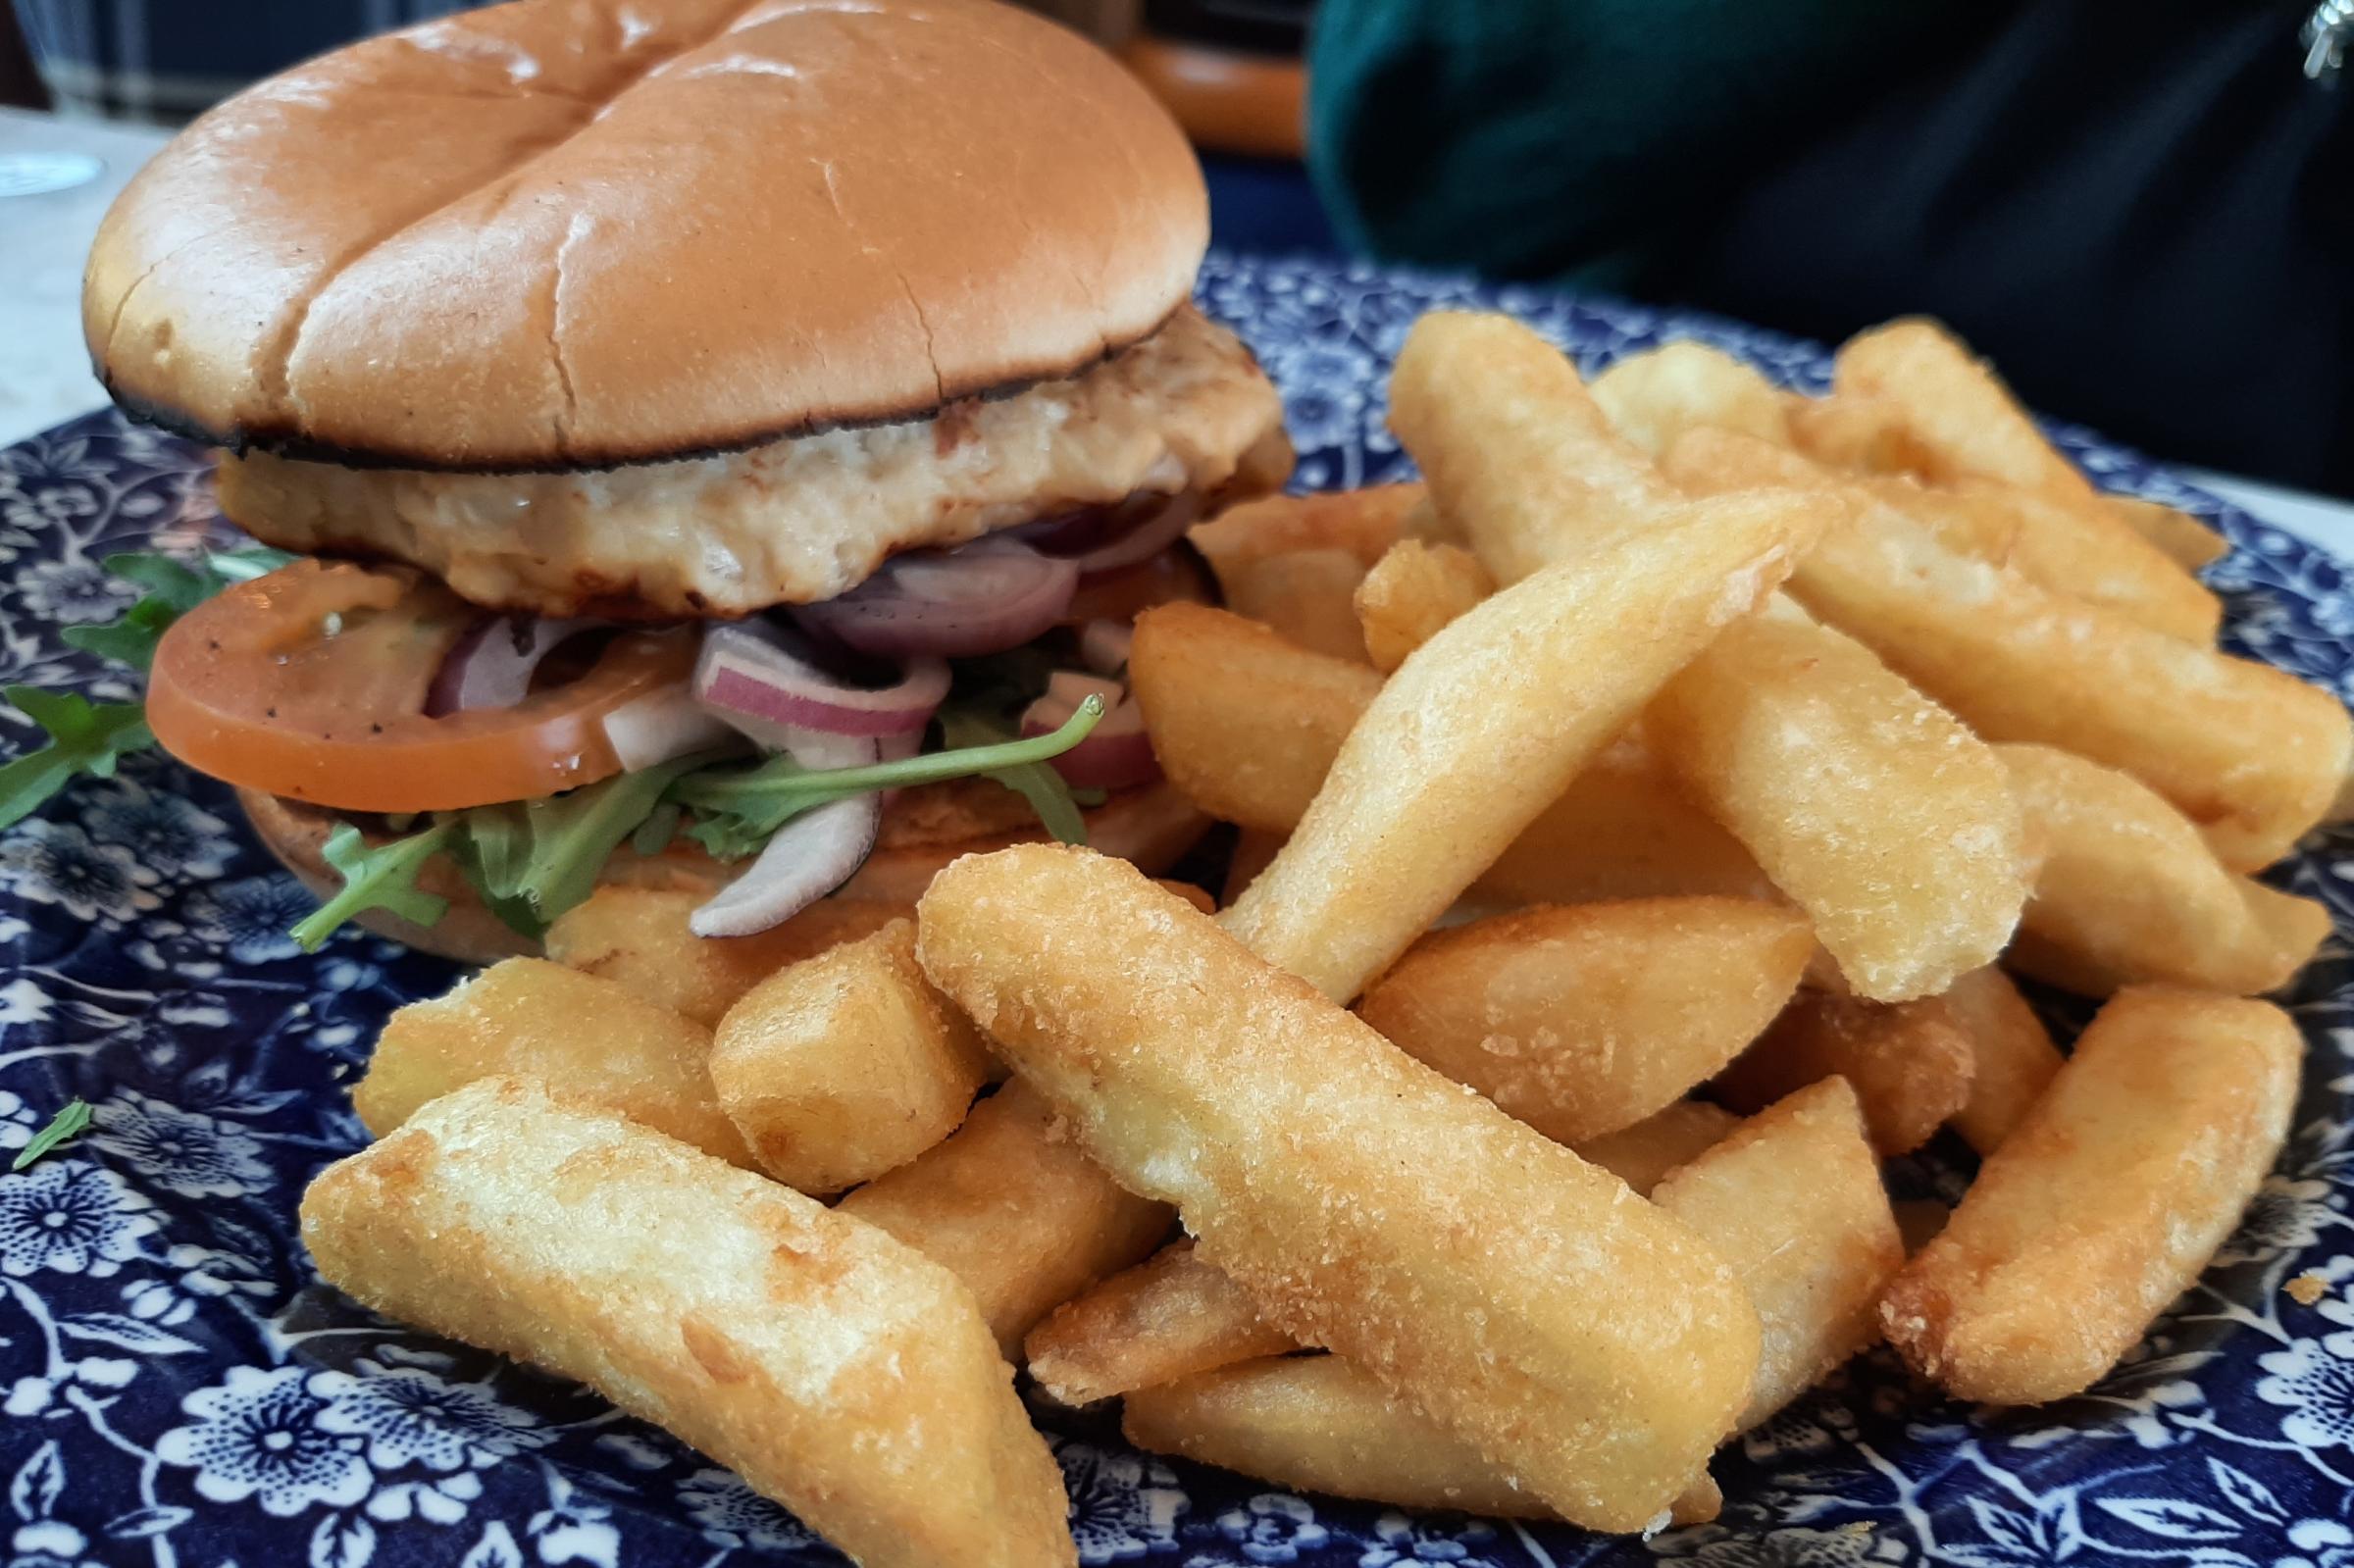 Chicken burger and chips - a hearty portion